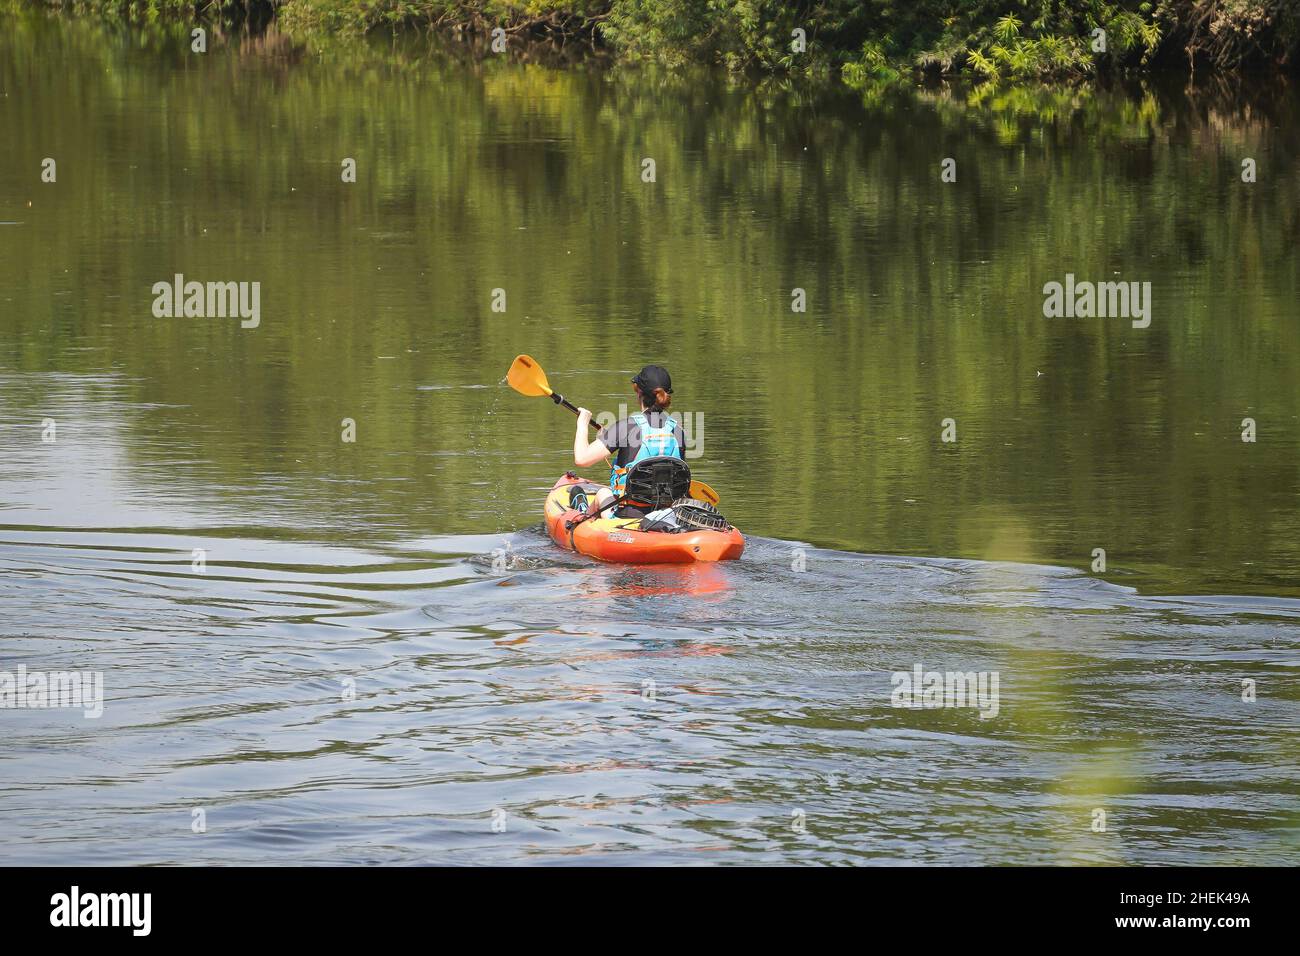 Rear view of isolated woman paddling kayak down the River Severn, UK. Stock Photo